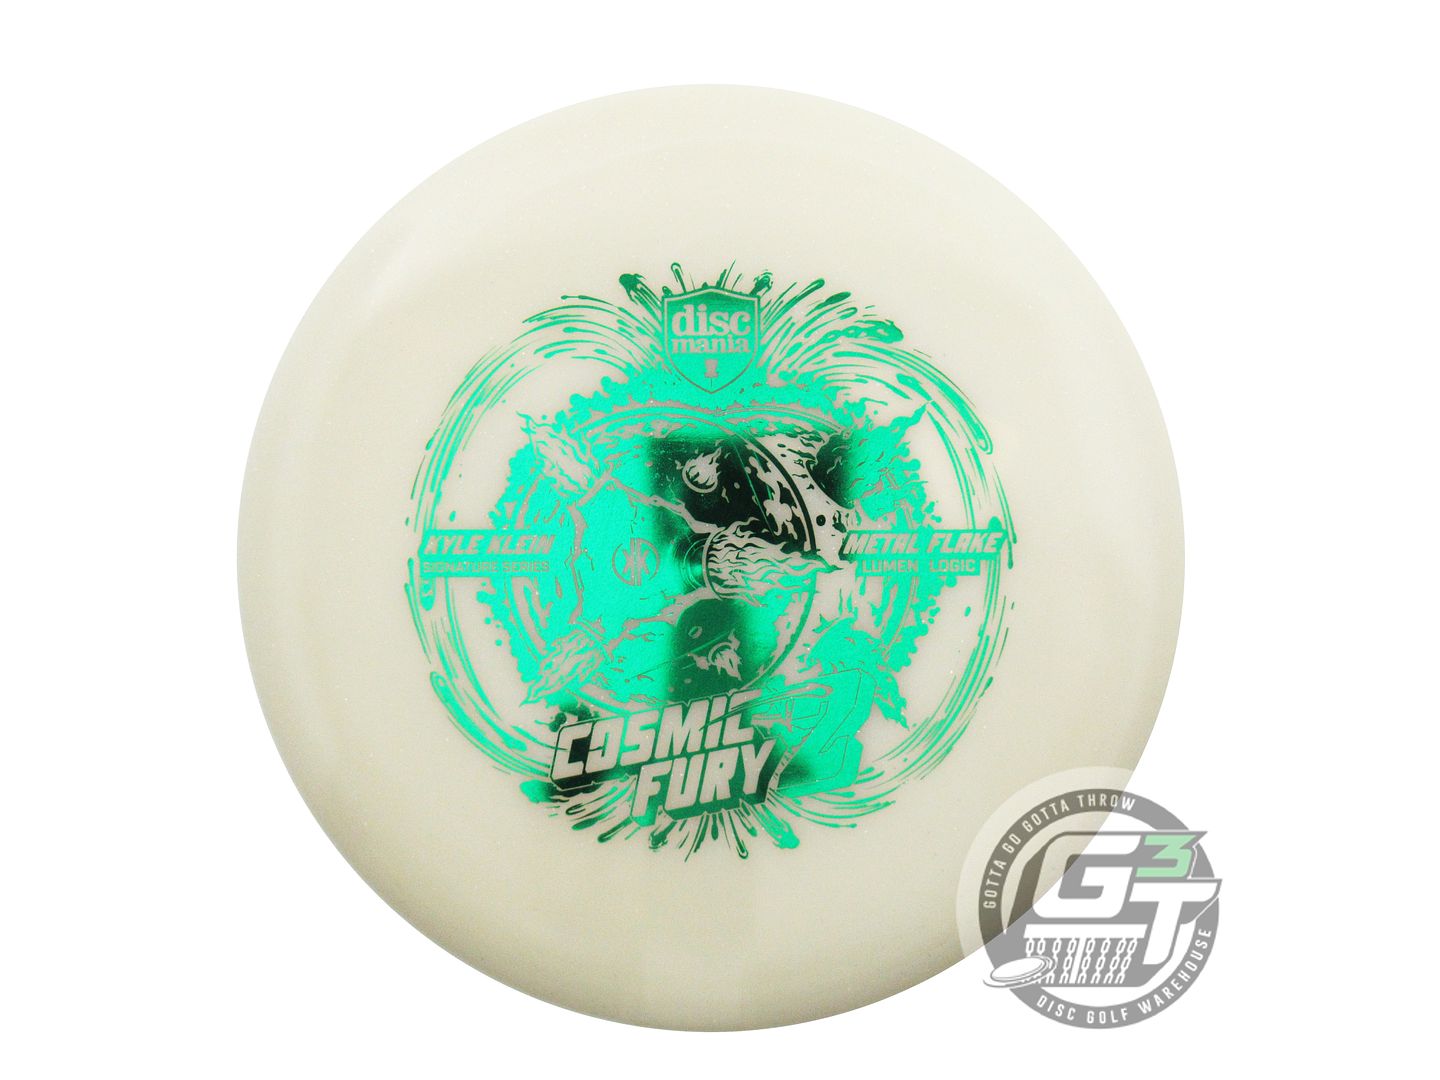 Discmania Limited Edition 2024 Signature Kyle Klein Cosmic Fury II Metal Flake Glow Lumen Neo Logic Putter Golf Disc (Individually Listed)